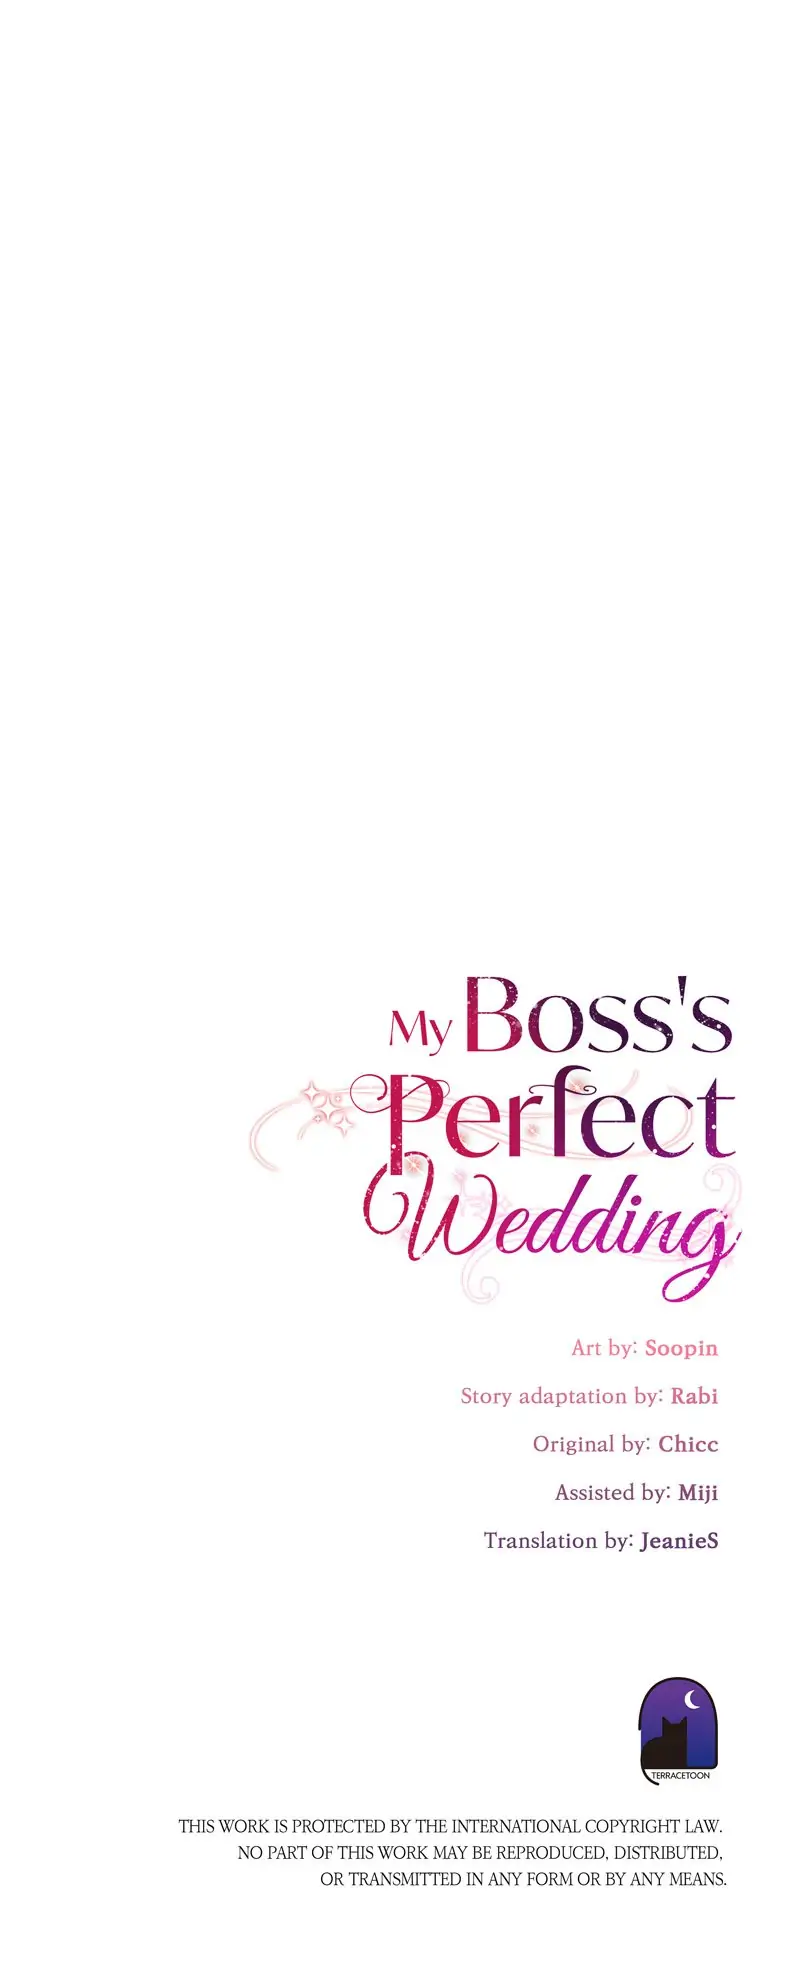 My Bosss’s Perfect Wedding chapter 2